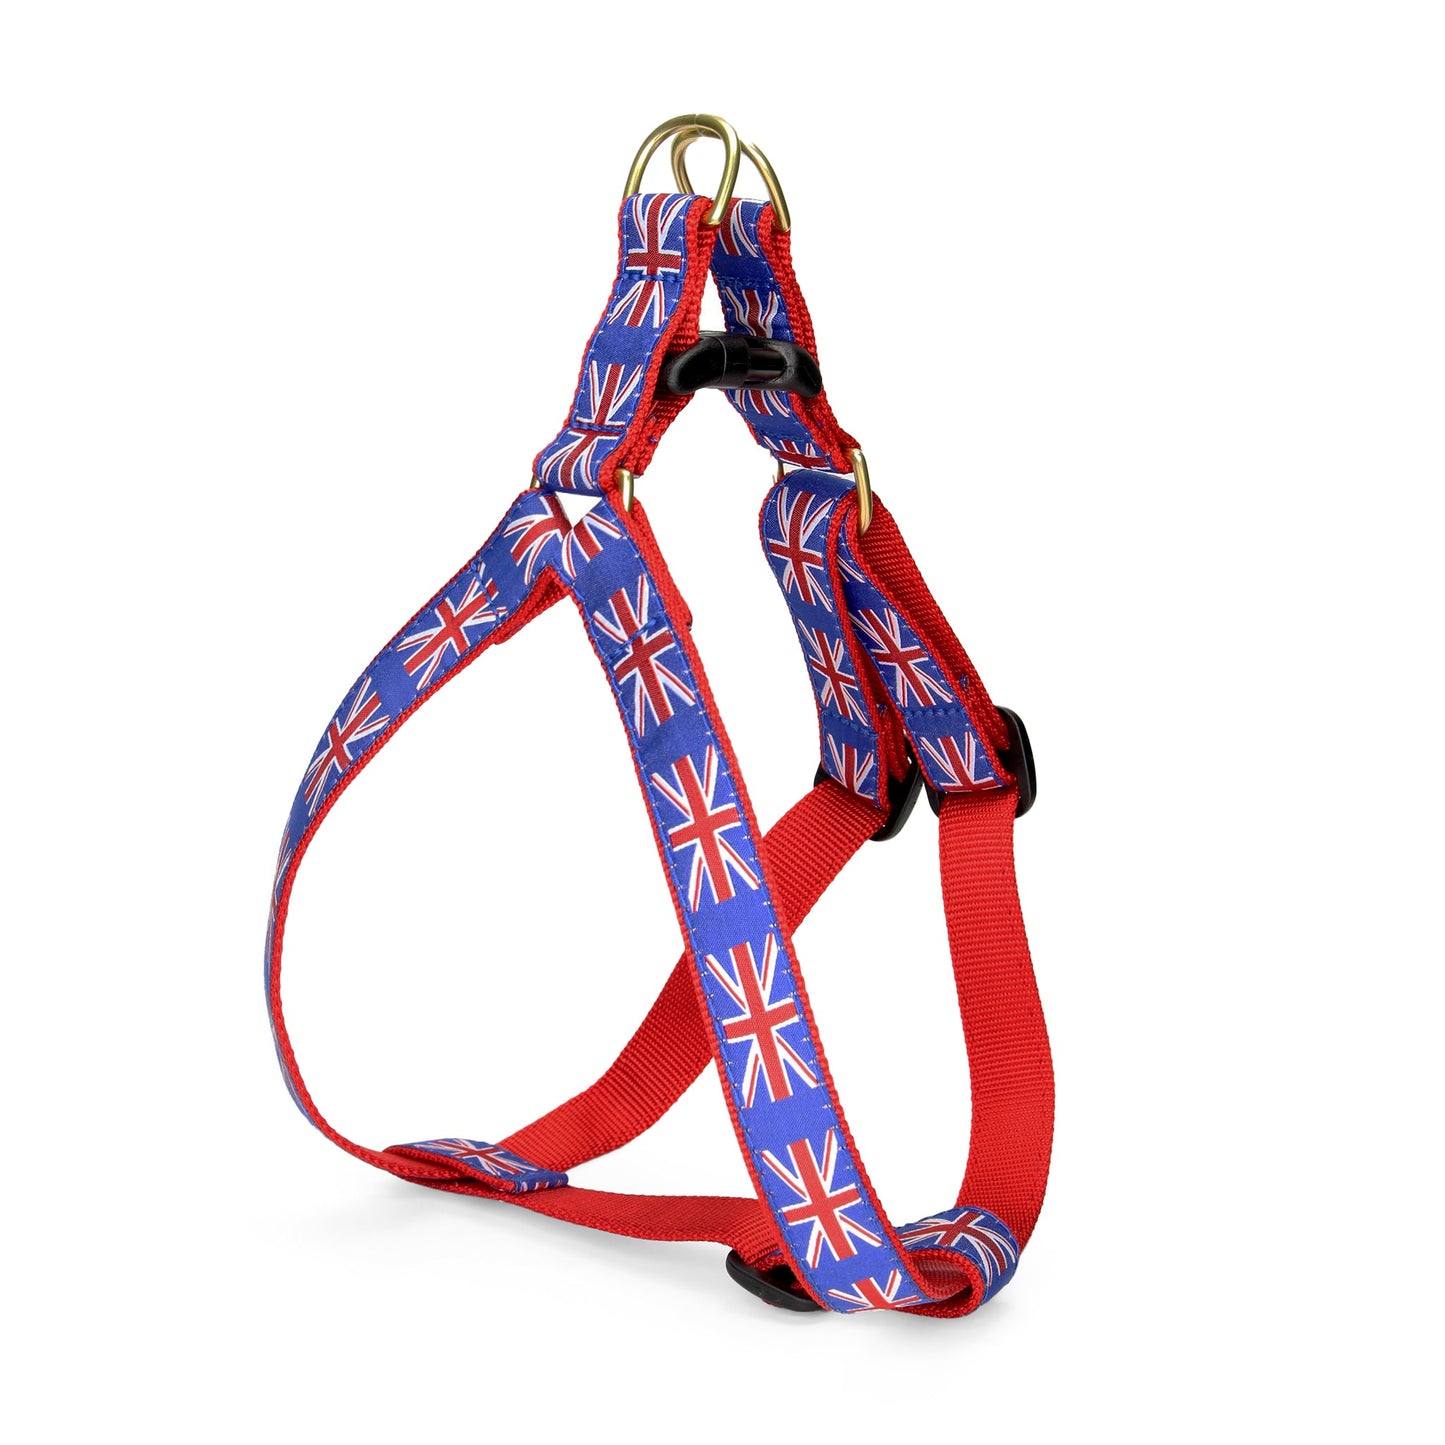 Union Jack Dog Harness by Up Country